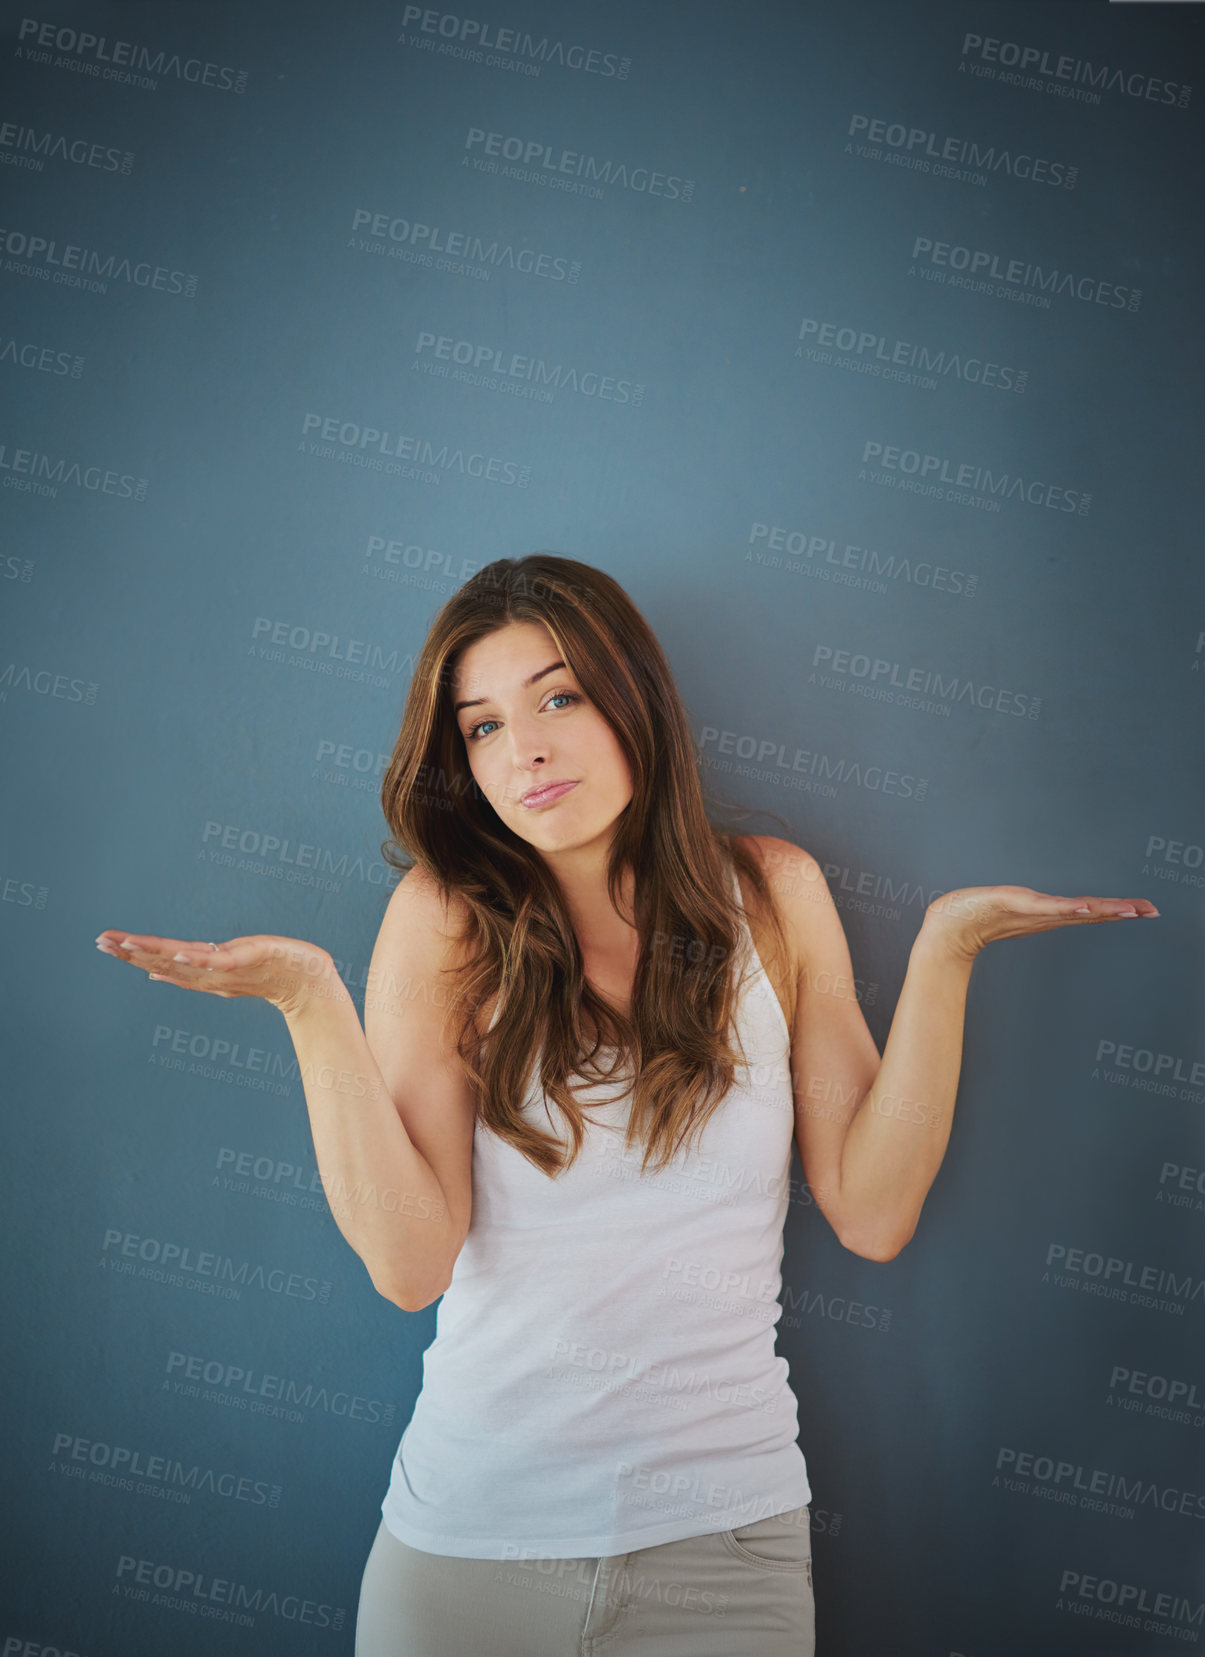 Buy stock photo Studio portrait of a confident young woman posing against a gray background